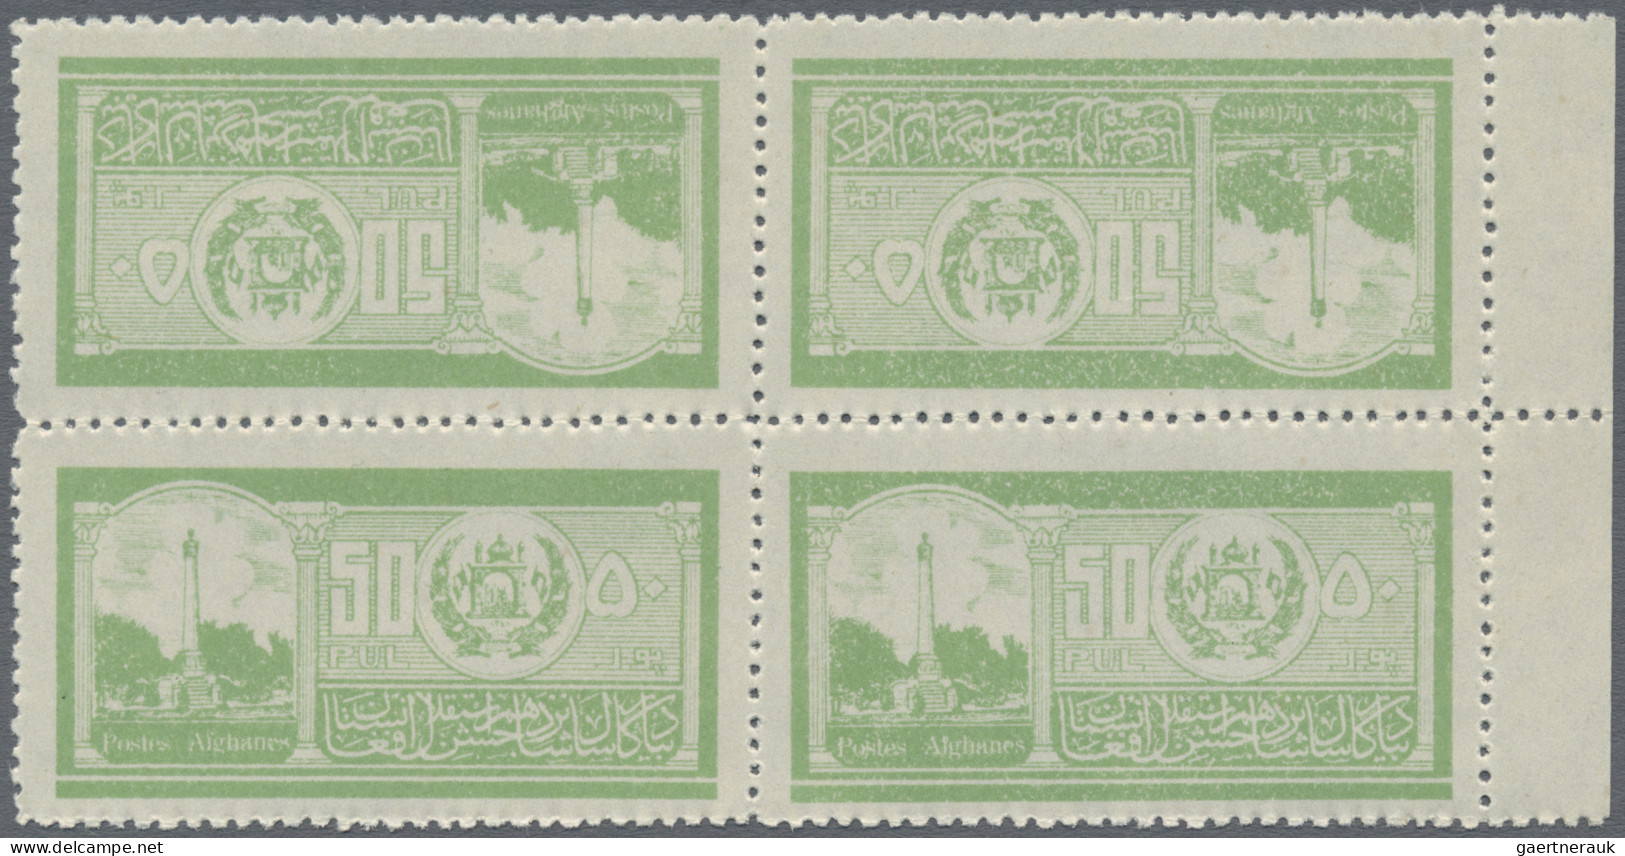 Afghanistan: 1934, Independence, 52 Tete-beche Pairs, Mint Without Gum As Issued - Afganistán